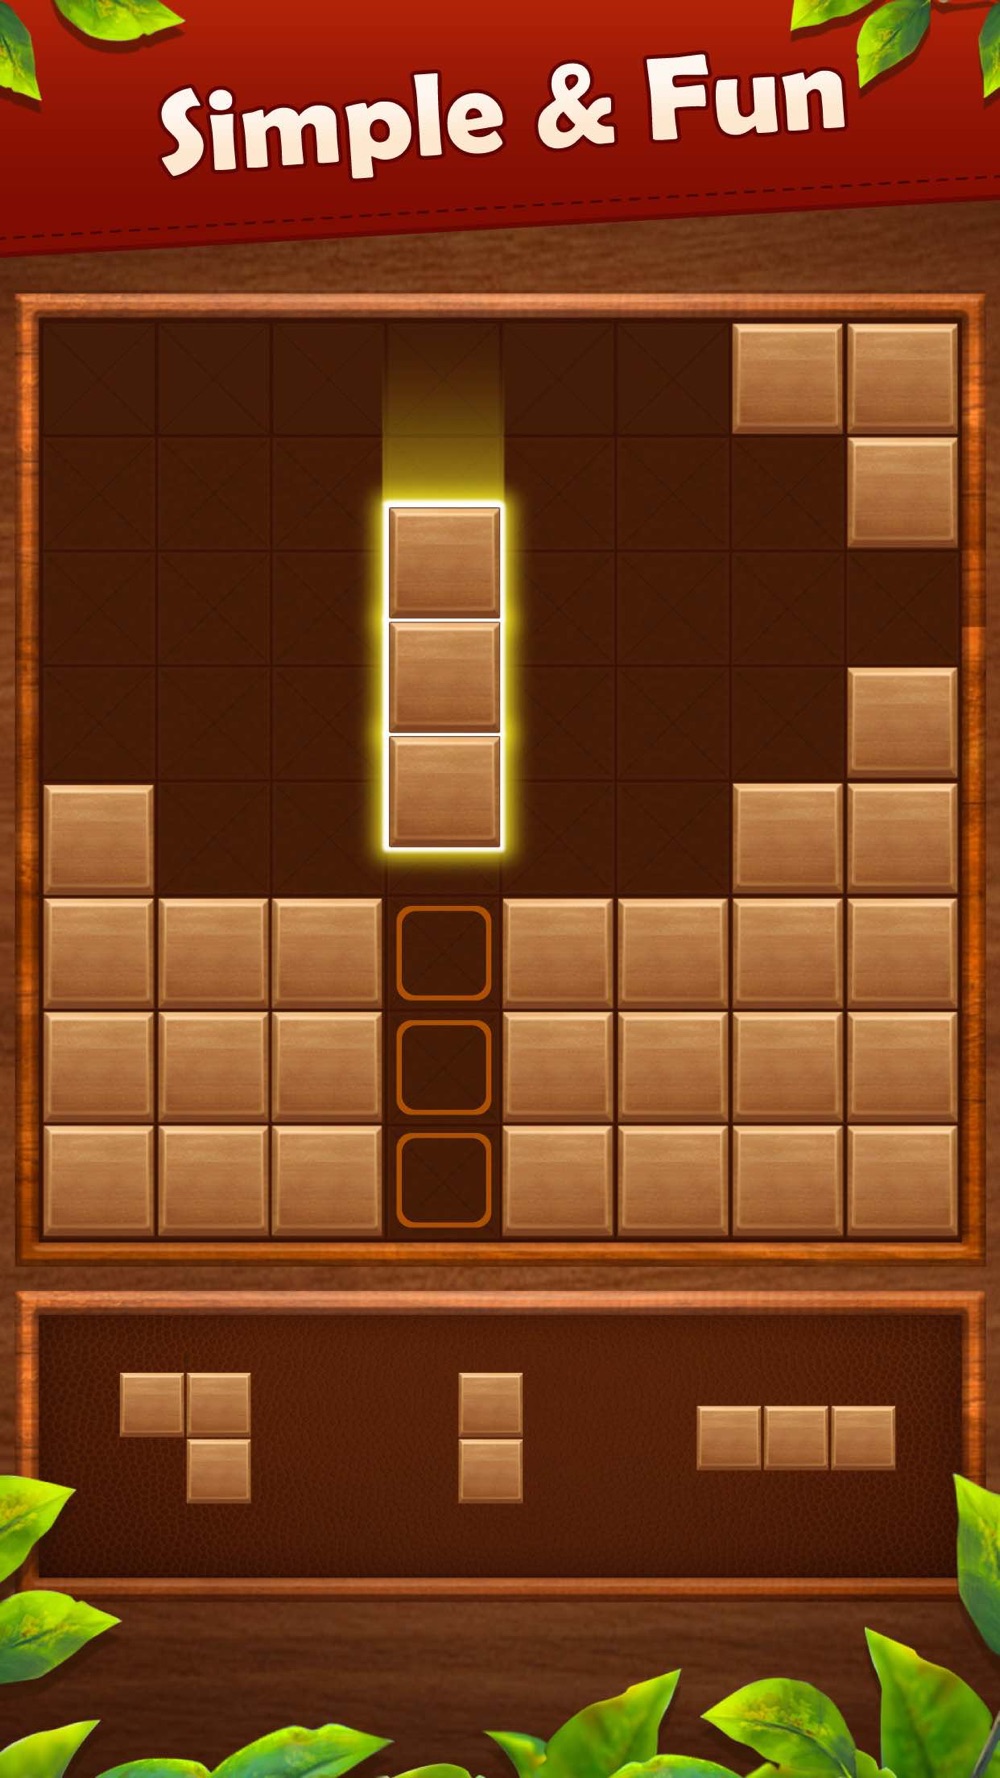 Wood Block Puzzle Deluxe Free Download App for iPhone - STEPrimo.com